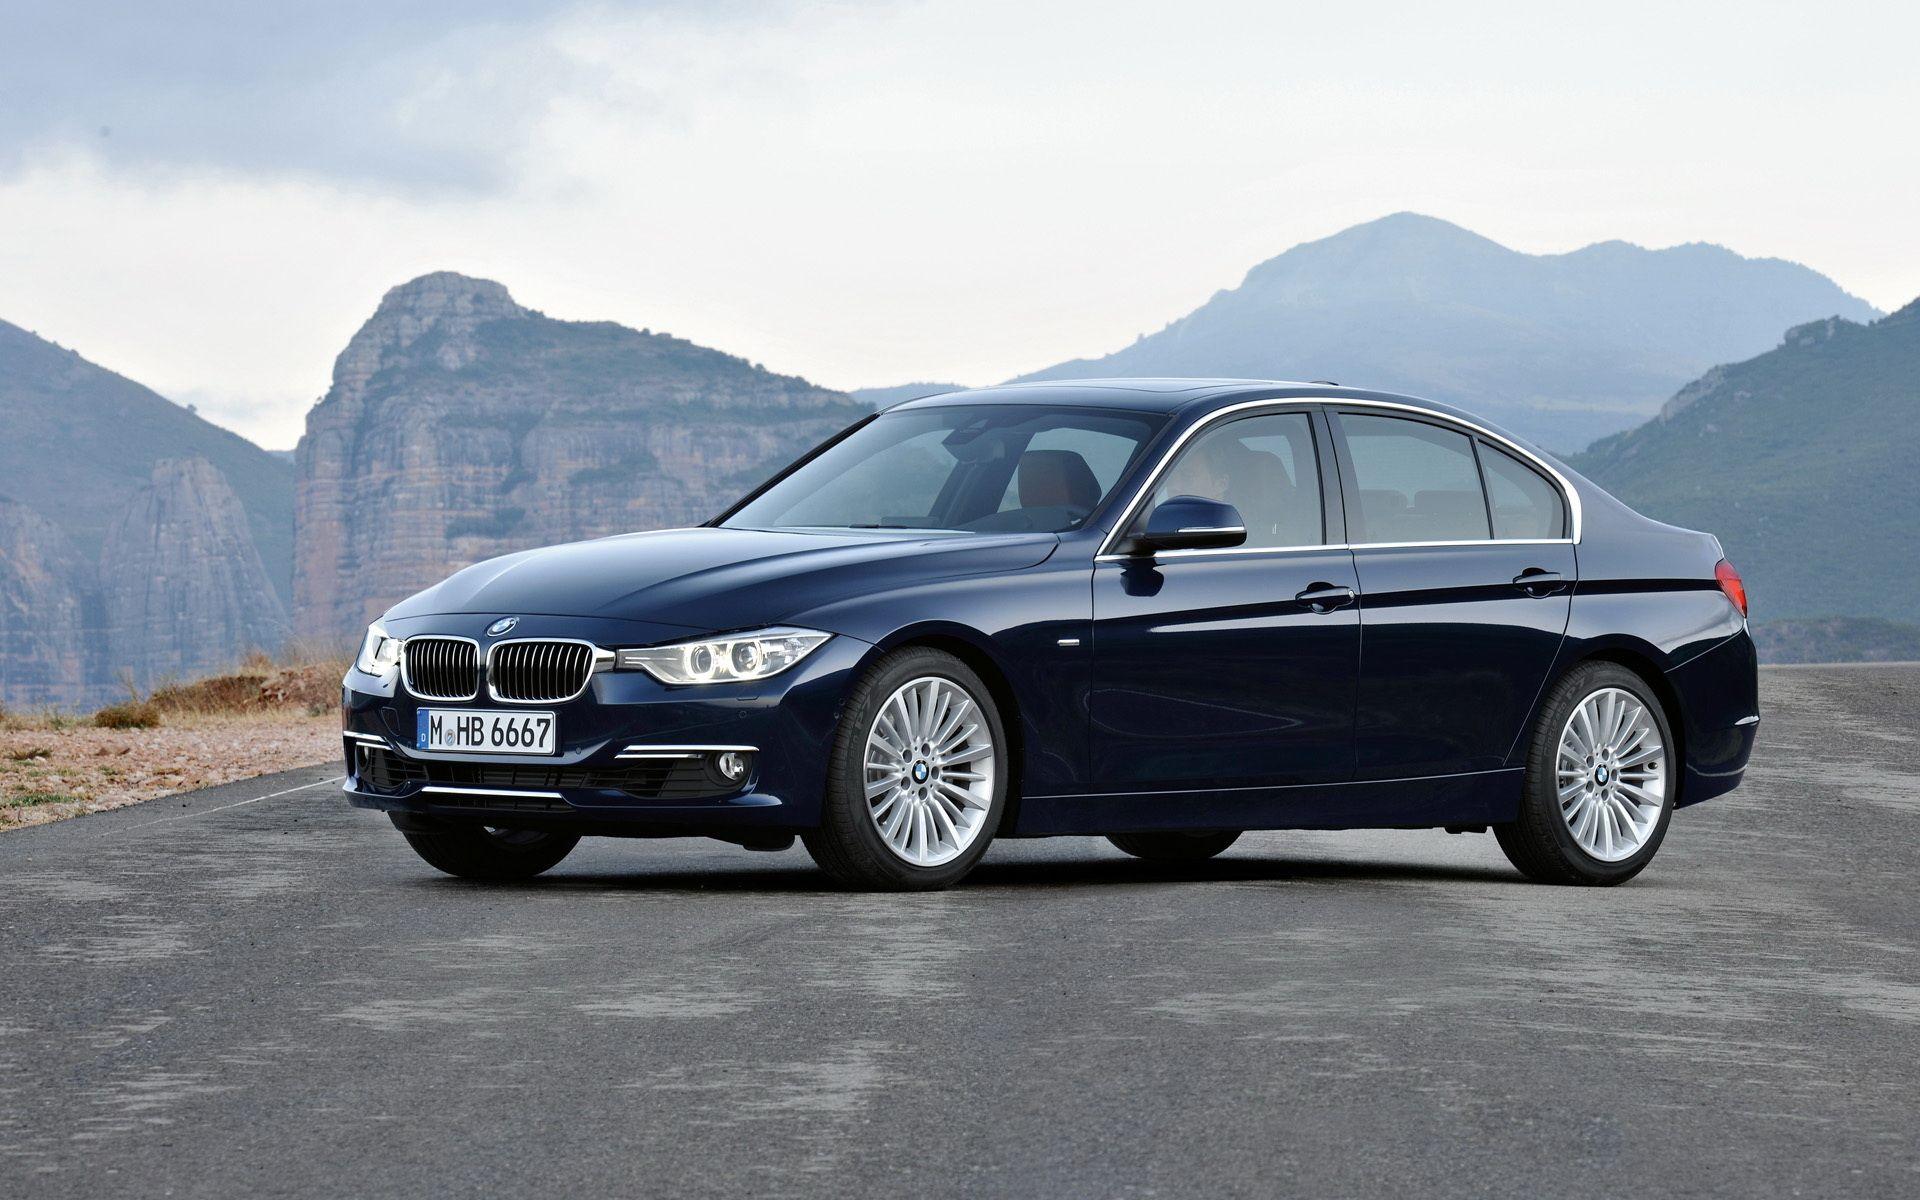 BMW 3 Series Wallpaper And Image, Picture, Photo